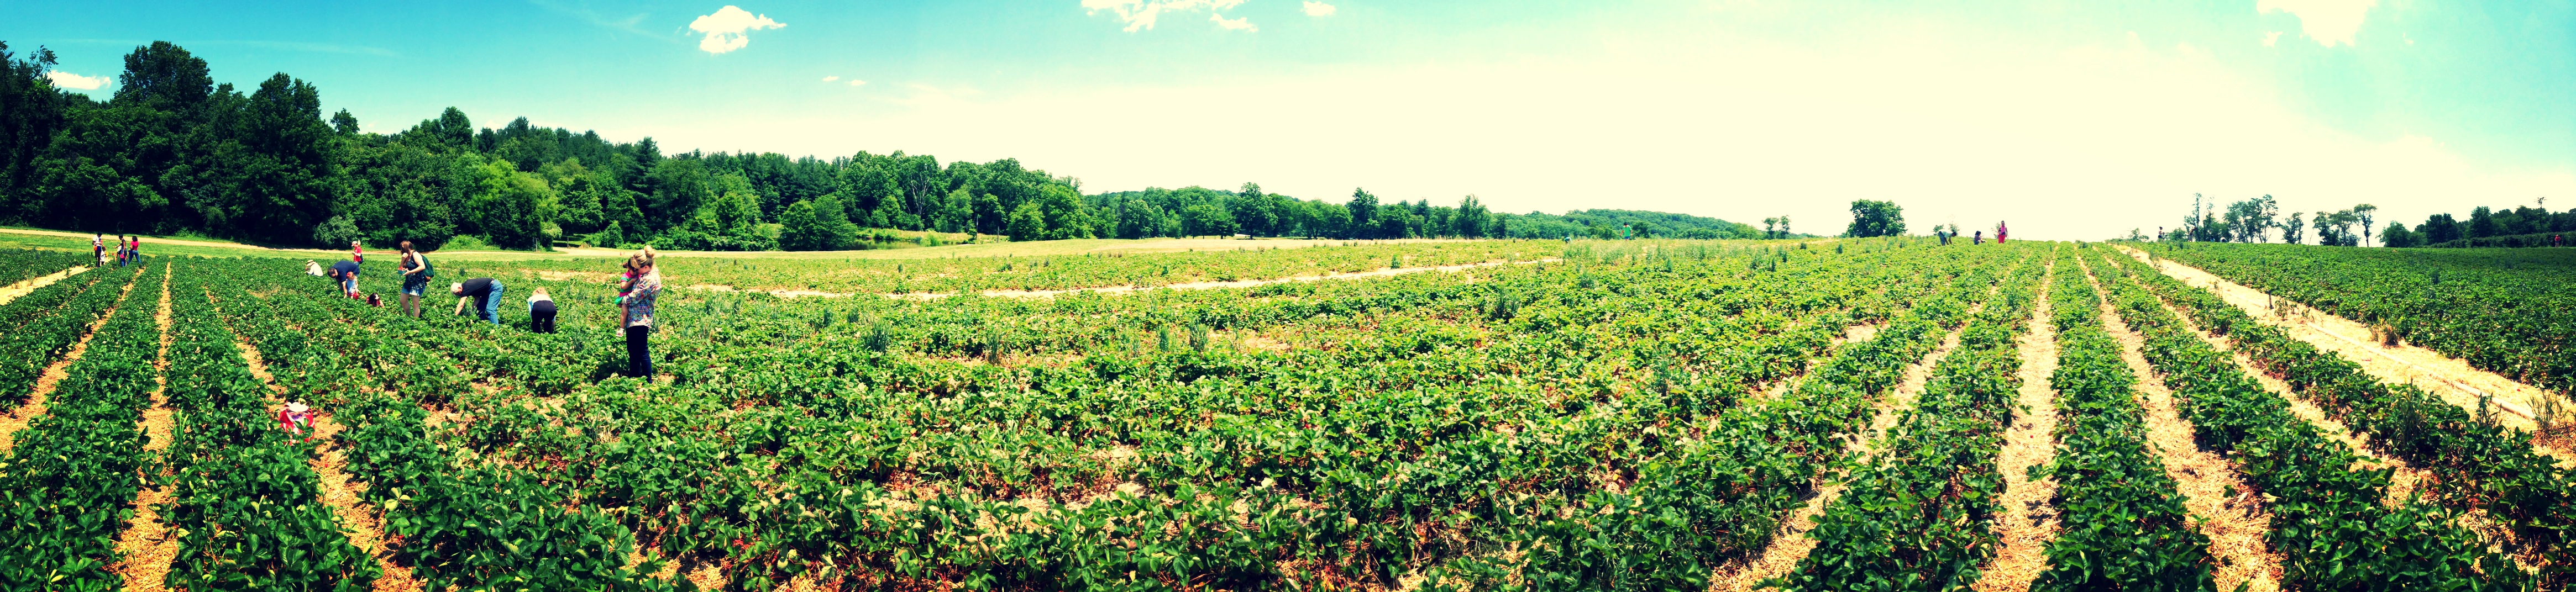 Berry Picking at Butler's Orchard | Karson Butler Events